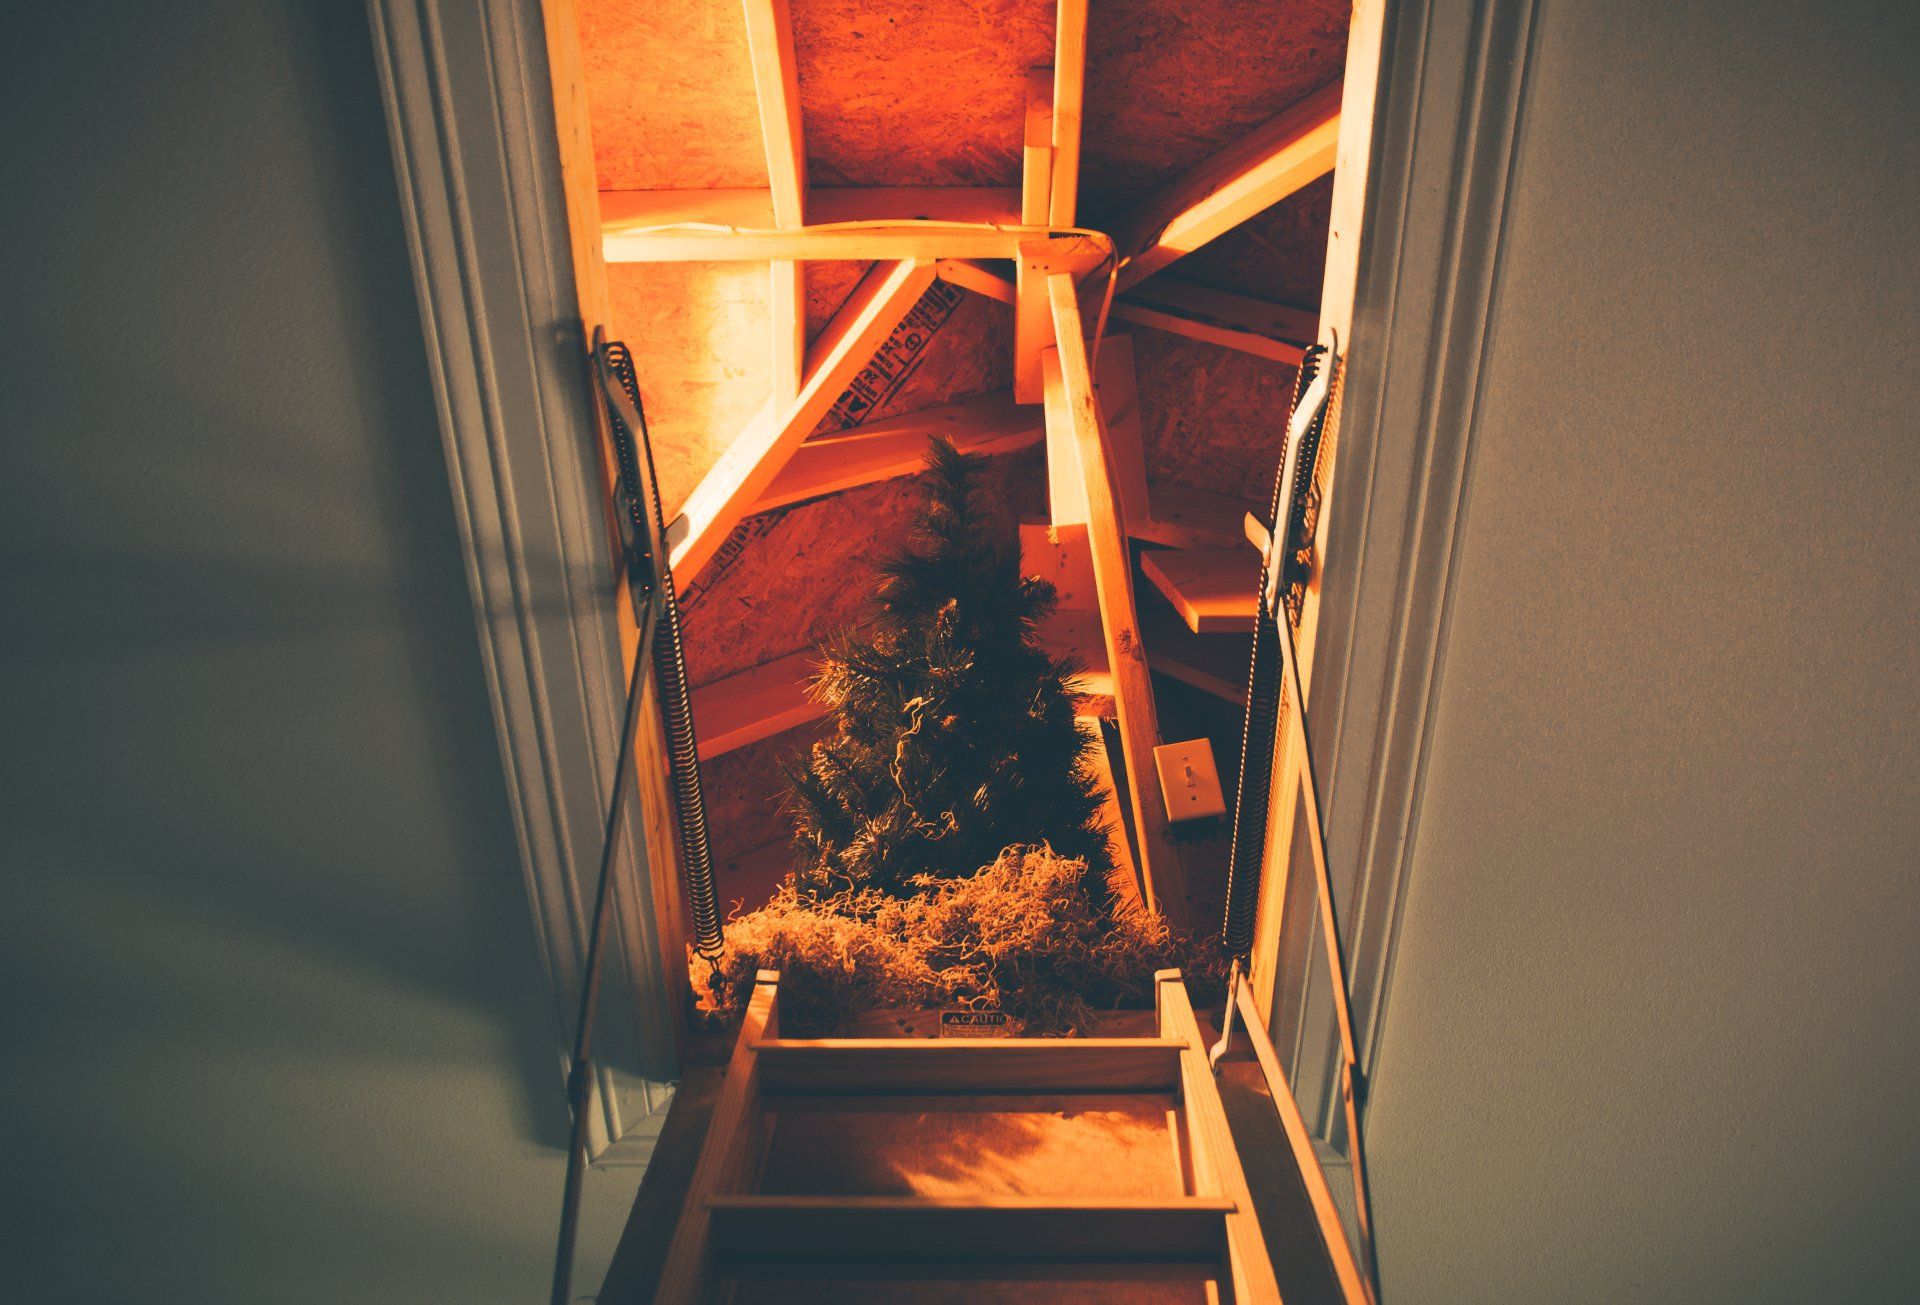 An inviting wooden staircase with a modern black metal railing, leading up to a warmly lit loft.